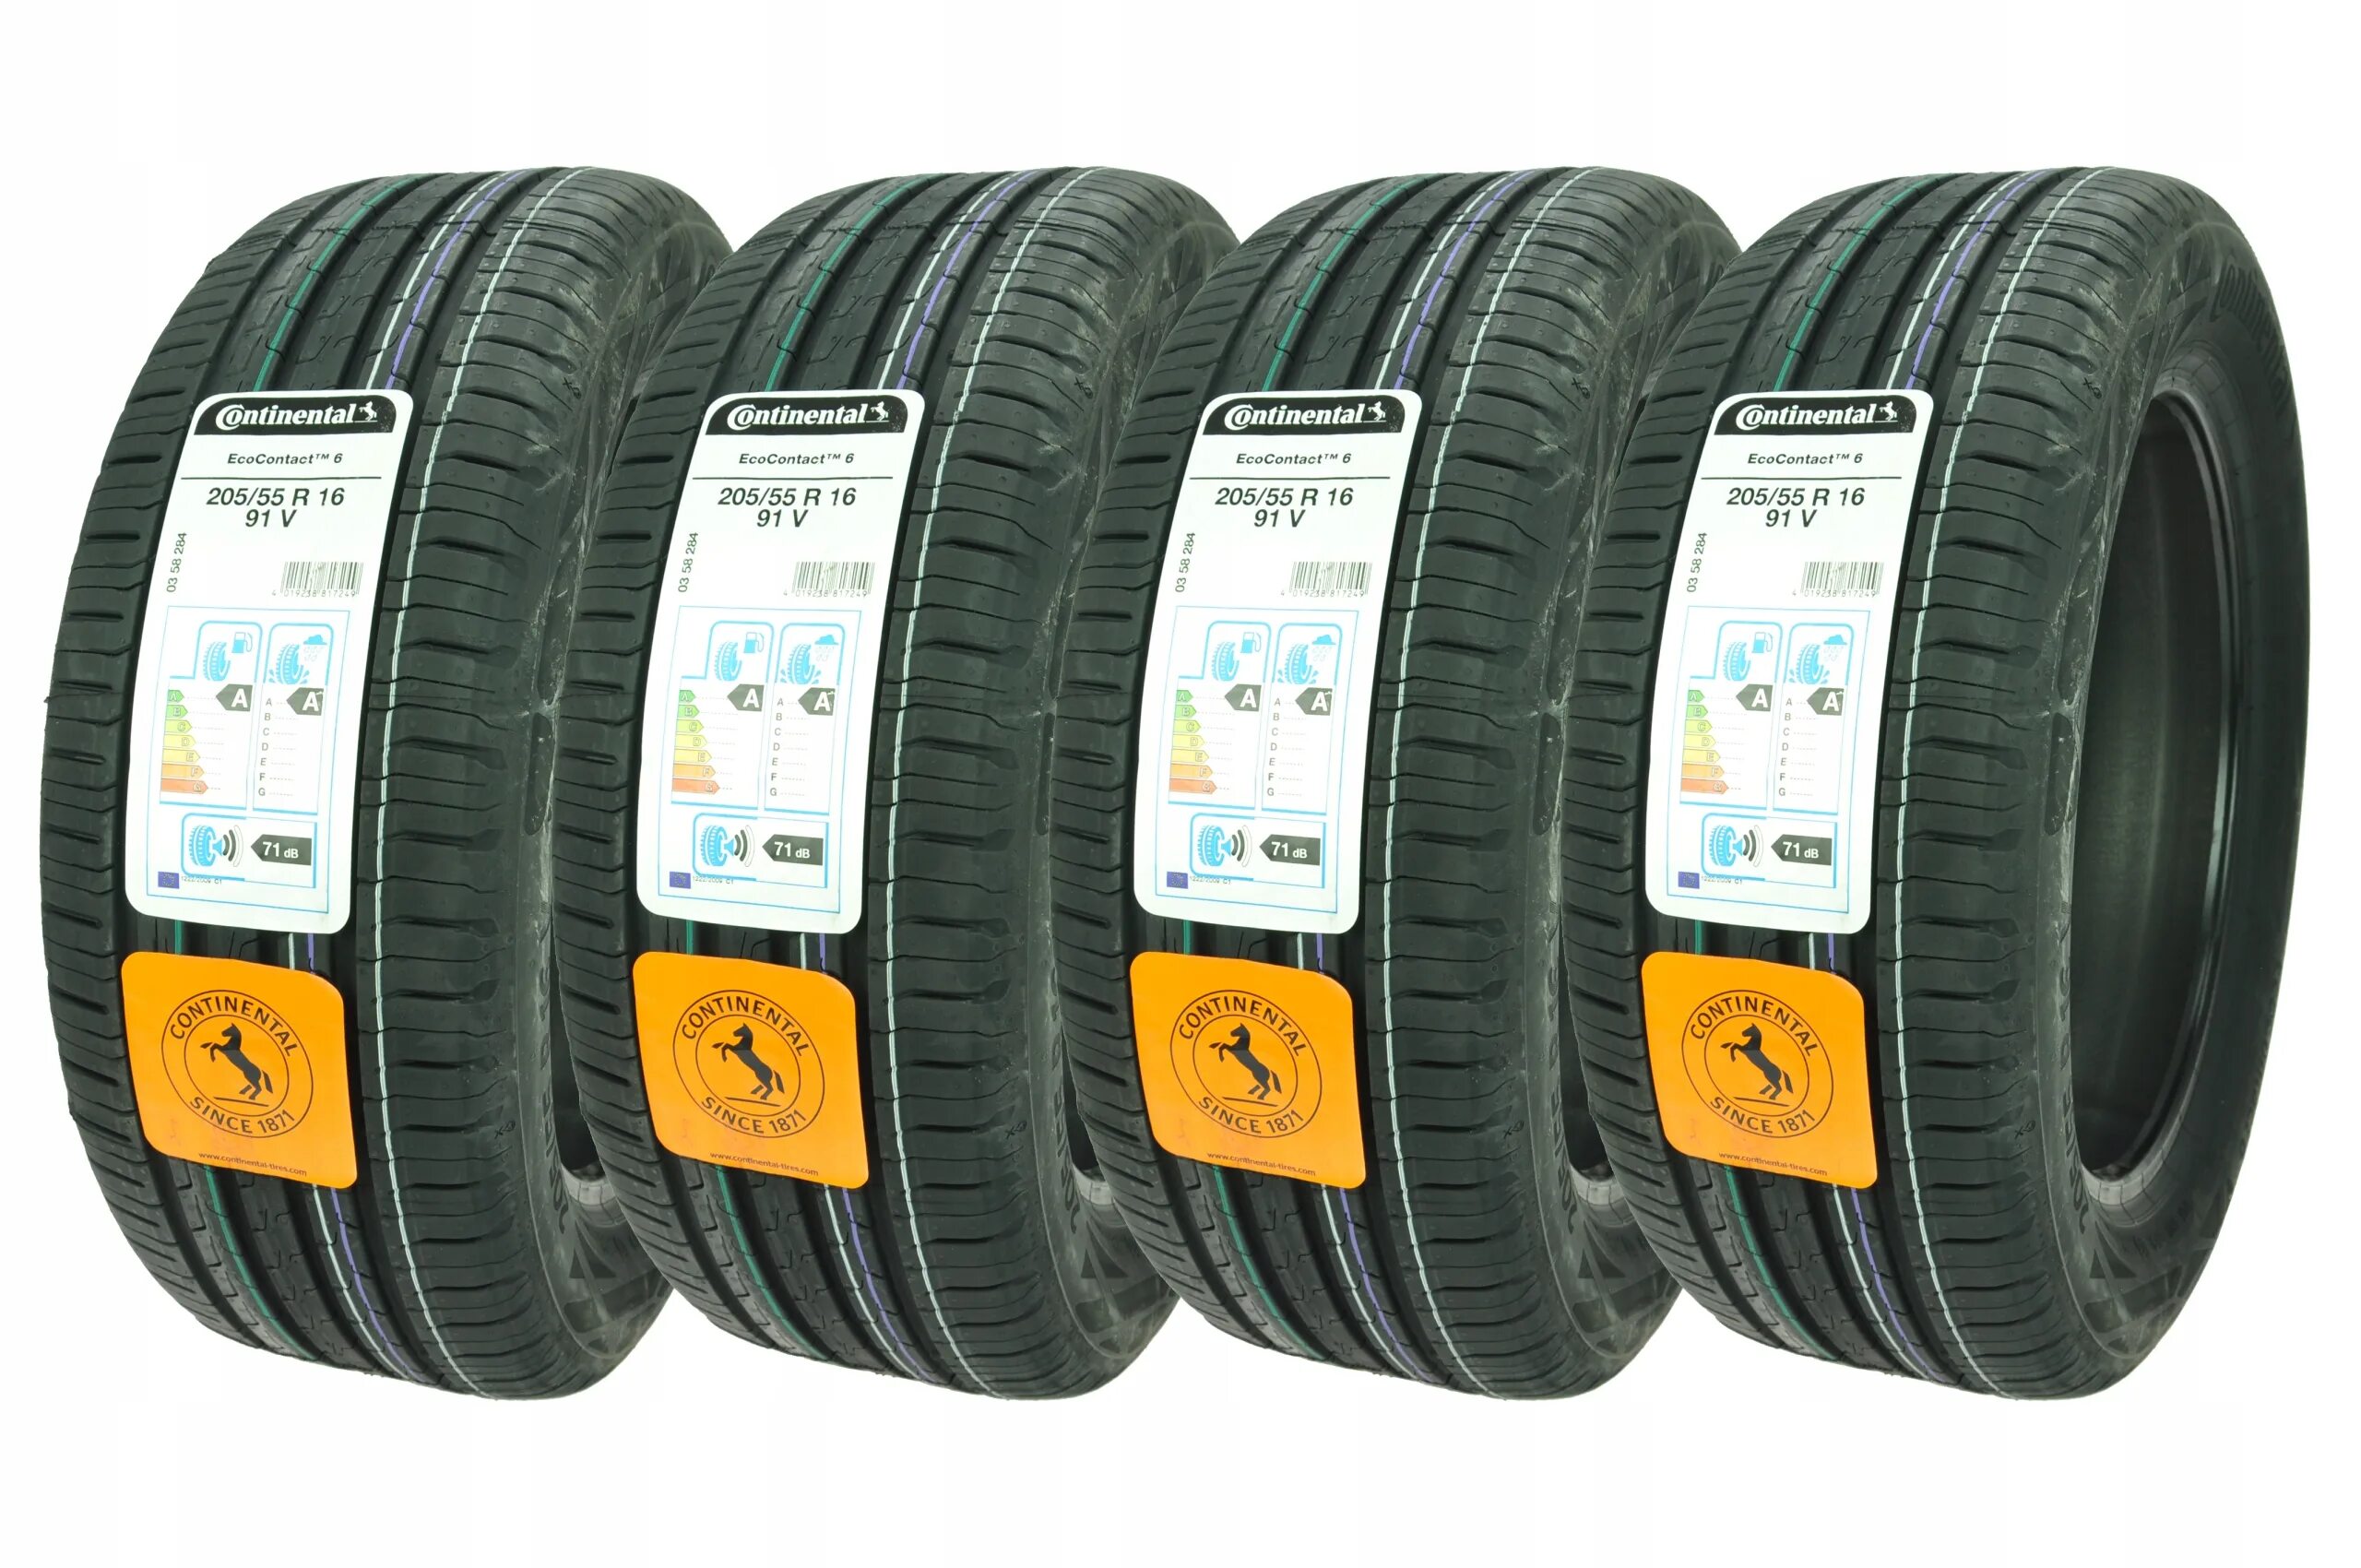 Continental PREMIUMCONTACT 6 205/55 r16. Continental Premium contact 6 205/55 r16. Continental PREMIUMCONTACT 205/55 r16. 205 55 16 Continental PREMIUMCONTACT 91h.